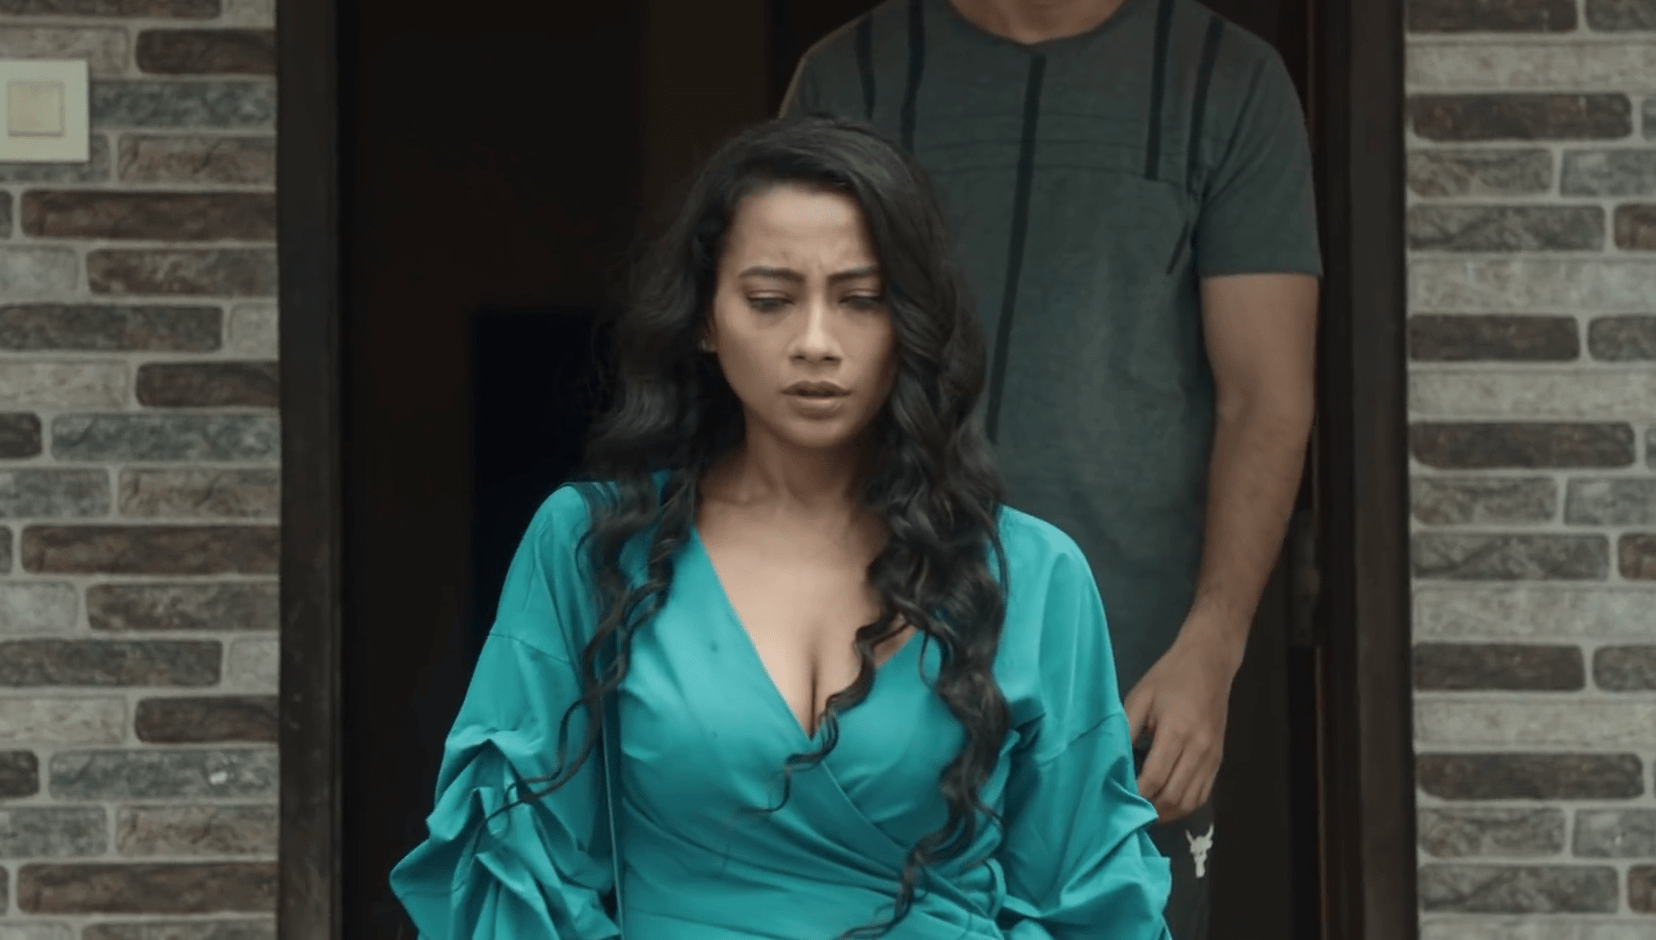 Caretaker 2 (Part-1) PalangTod Ullu Web Series Review in Hindi Cast, Actress Name, Story, Release Date, How to Watch All Episodes Online? | केयरटेकर 2 पार्ट 2 उल्लू वेब सीरीज़